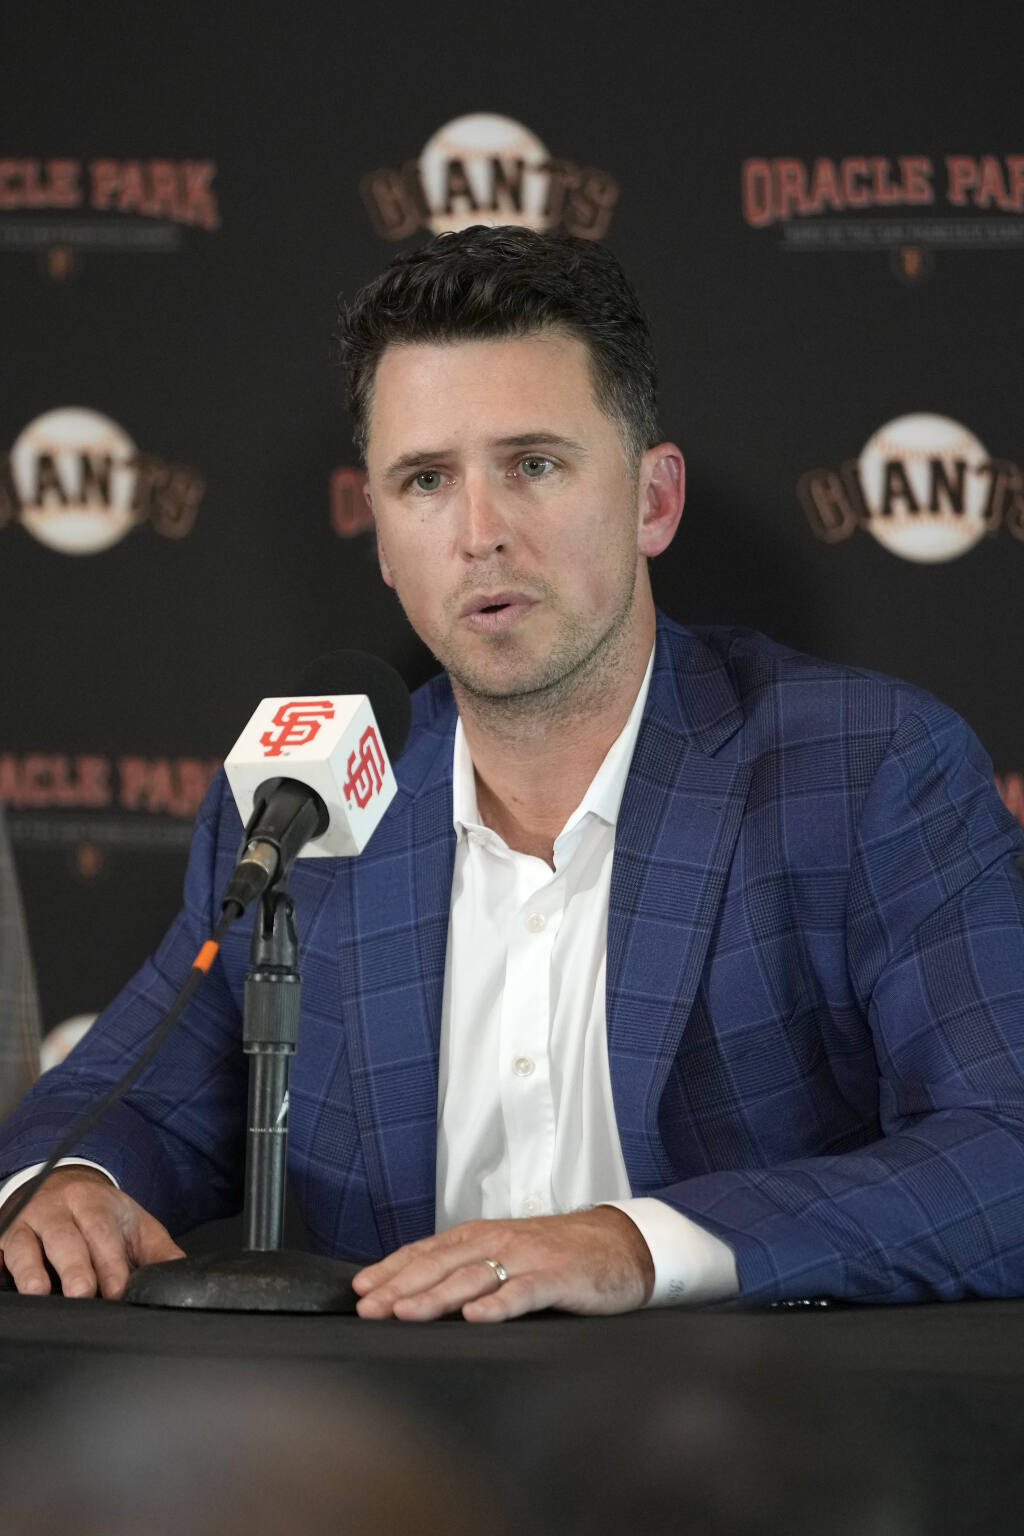 Giants celebrate Buster Posey, who always understood what was needed of him  - The Athletic